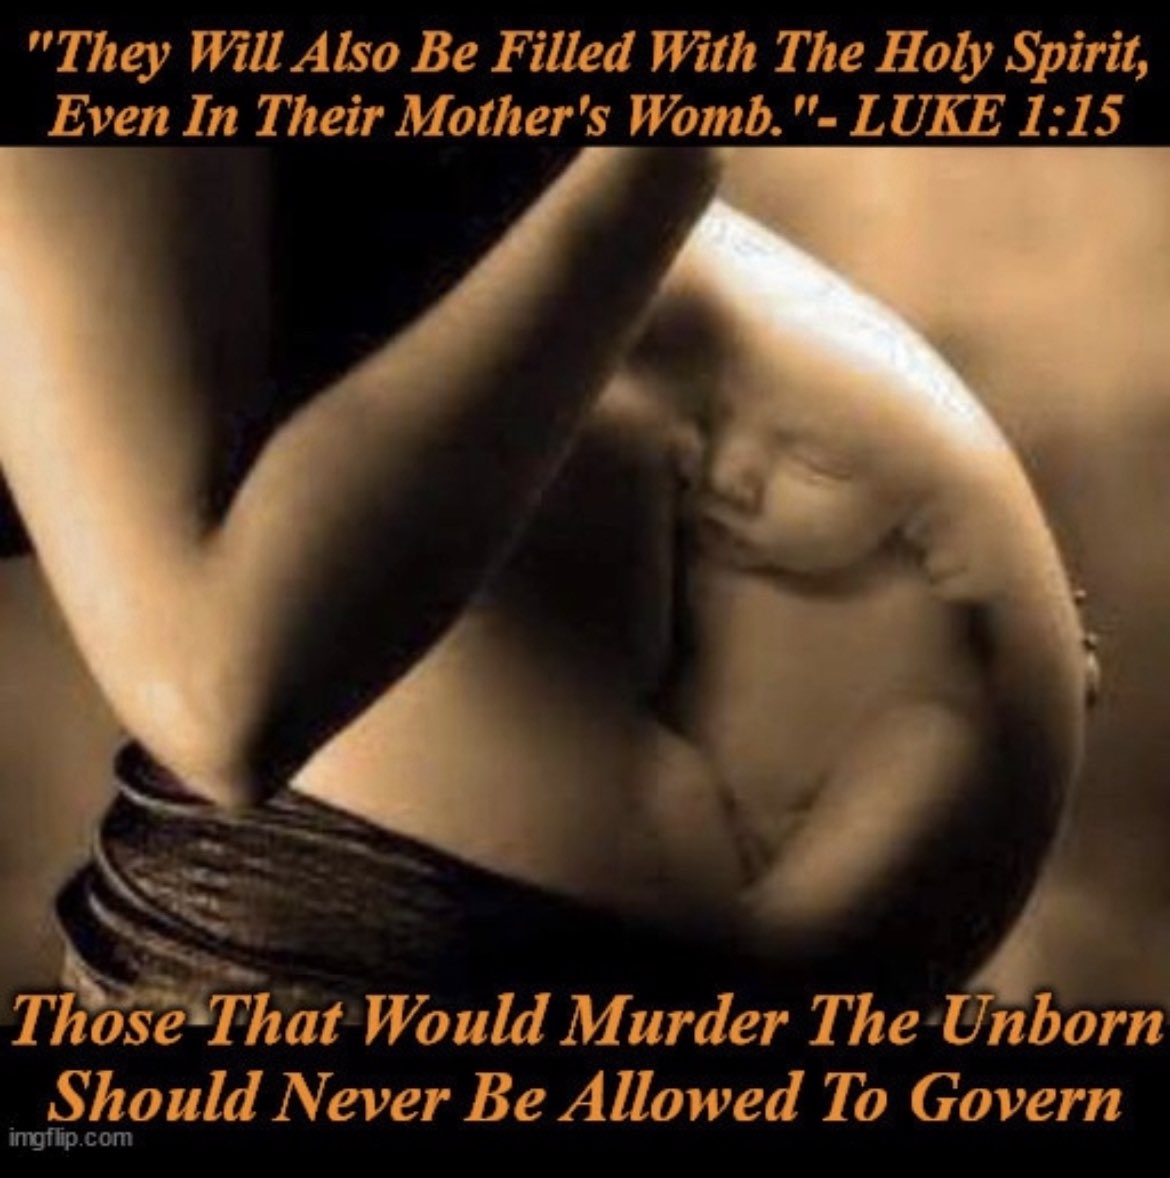 @JoeBiden 'They Will Also Be Filled With The Holy Spirit, Even In Their Mother's Womb.'- LUKE 1:15

Those That Would Murder The Unborn Should Never Be Allowed To Govern! #TrumpNowMoreThanEver